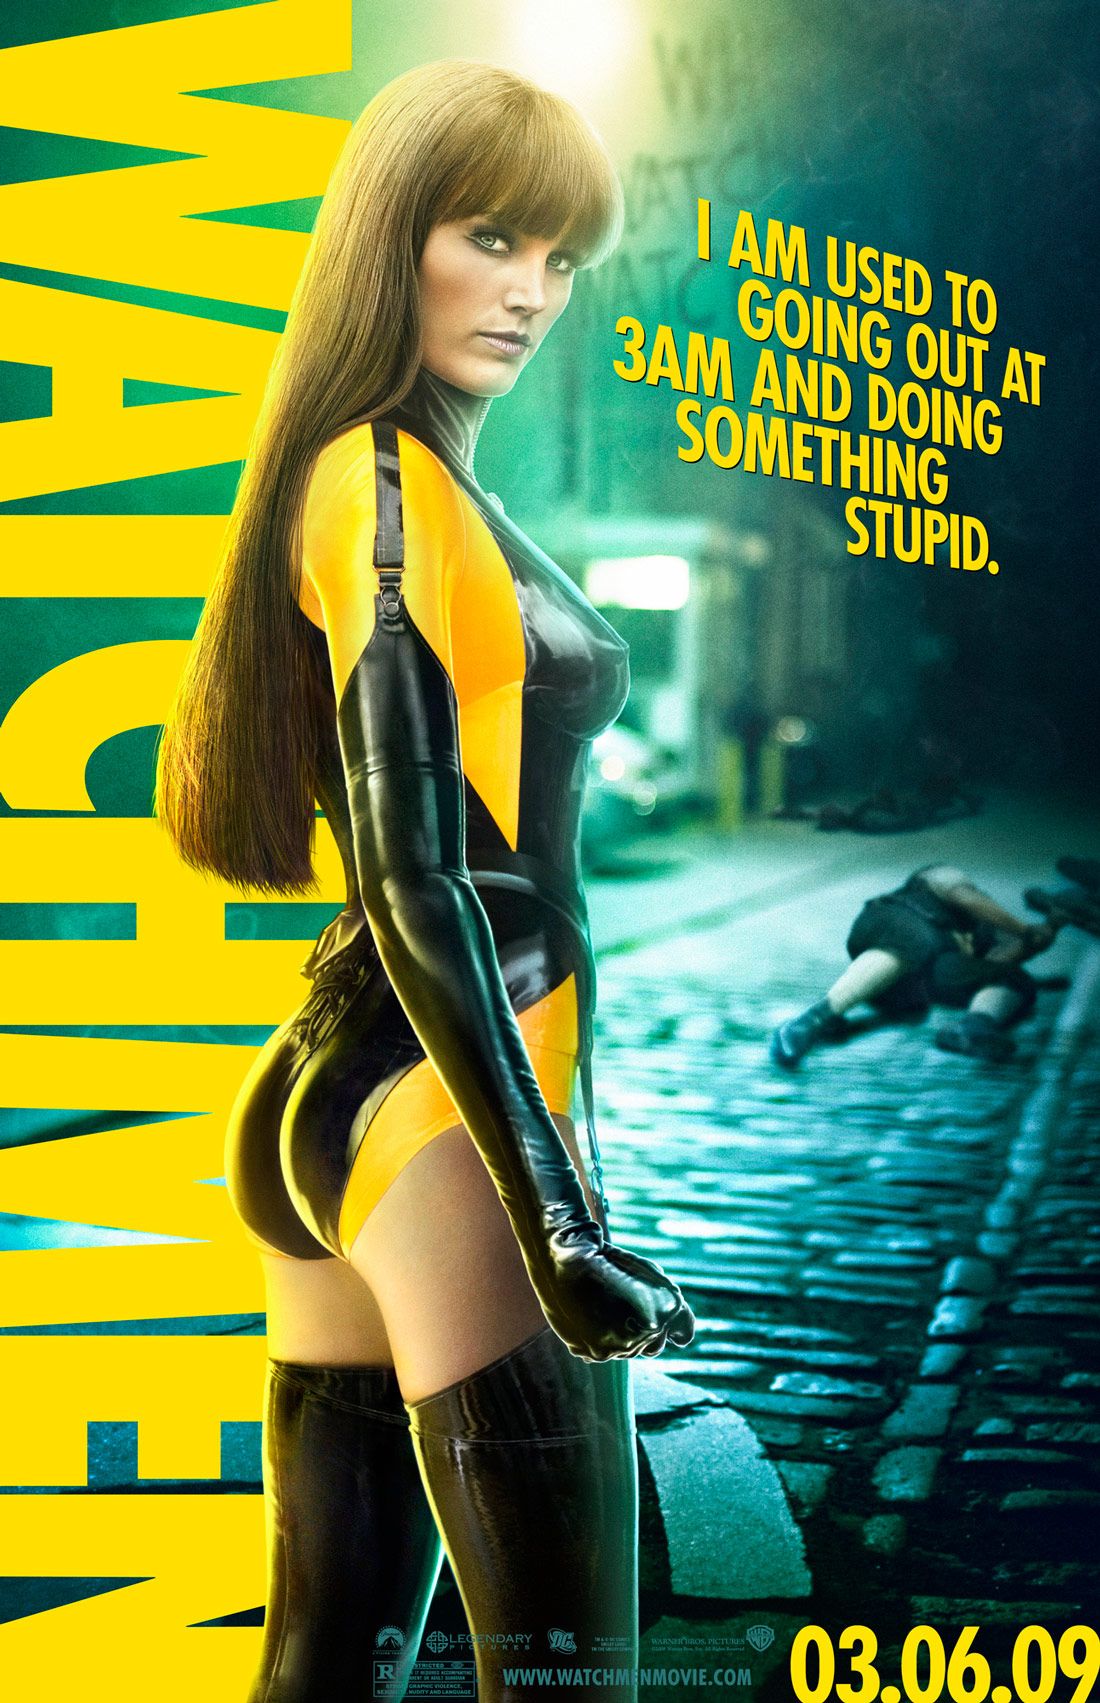 Watchmen Character Poster #4